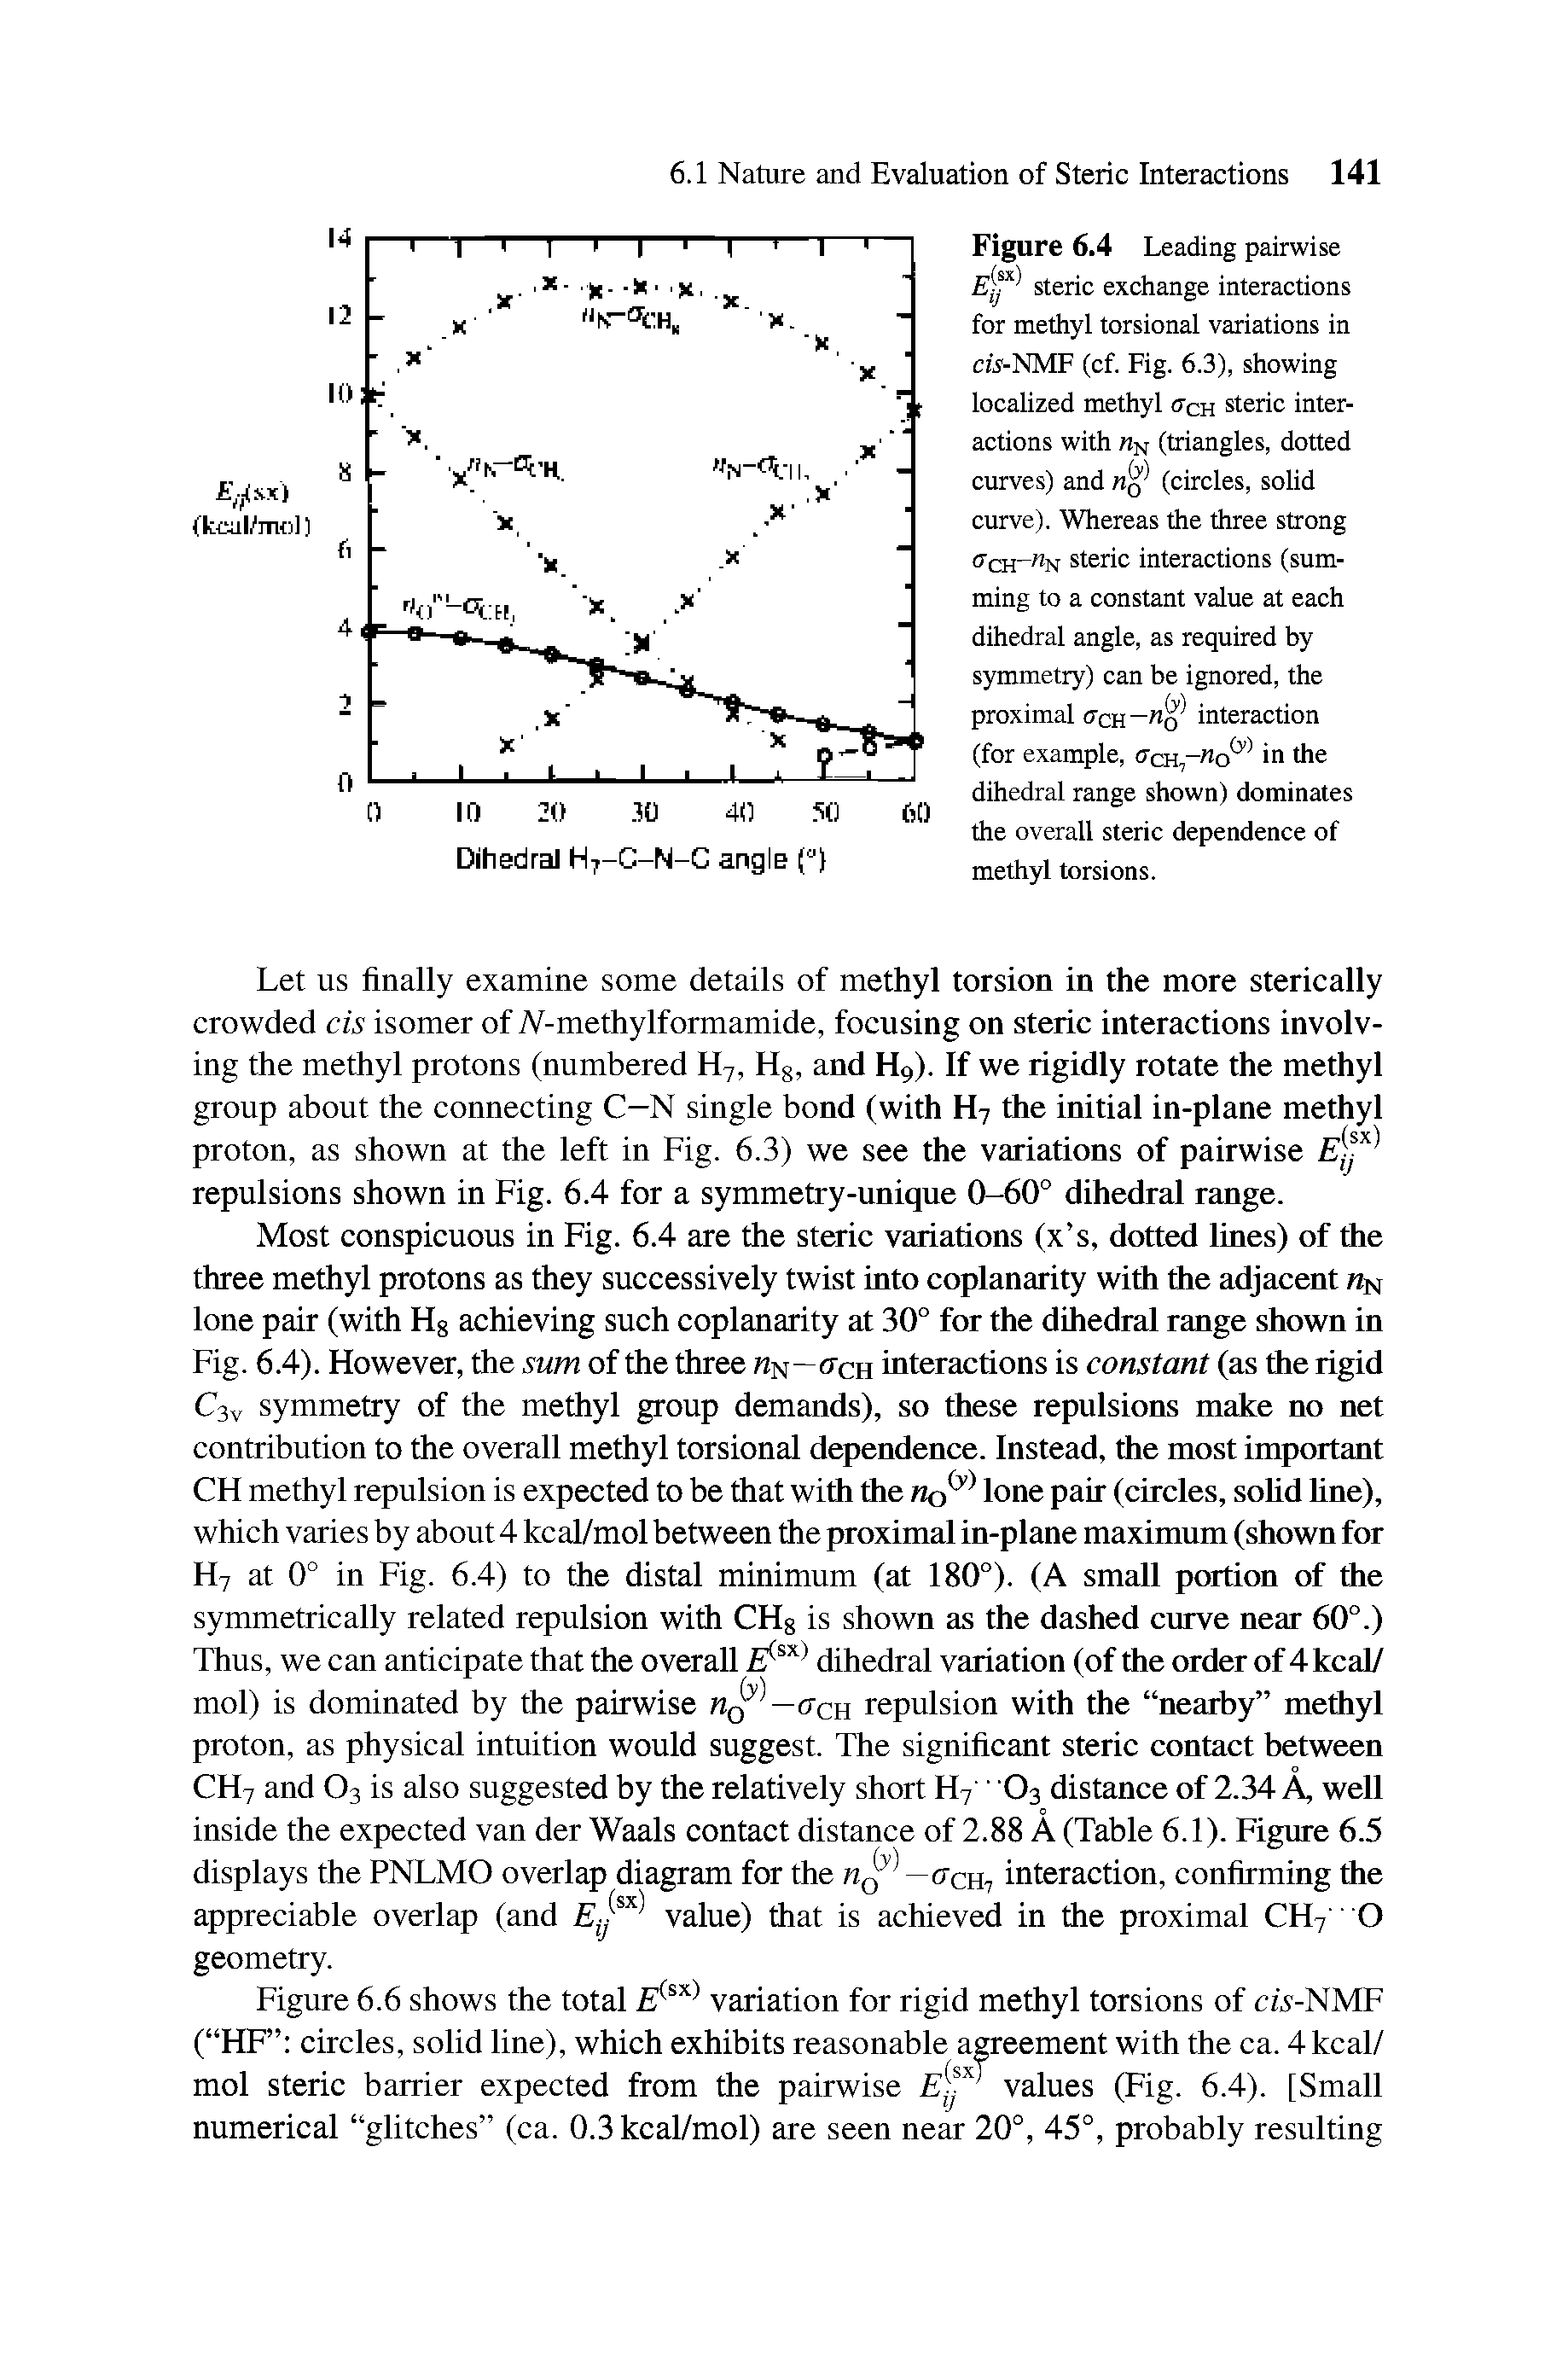 Figure 6.4 Leading pairwise steric exchange interactions for methyl torsional variations in cis-NMF (cf. Fig. 6.3), showing locaUzed methyl <rcH steric interactions with (triangles, dotted curves) and (circles, soUd curve). Whereas the three strong (Tcir nN steric interactions (summing to a constant value at each dihedral angle, as required by symmetry) can be ignored, the proximal dcR—n interaction (for example, <rcH,-no <n the dihedral range shown) dominates the overall steric dependence of methyl torsions.